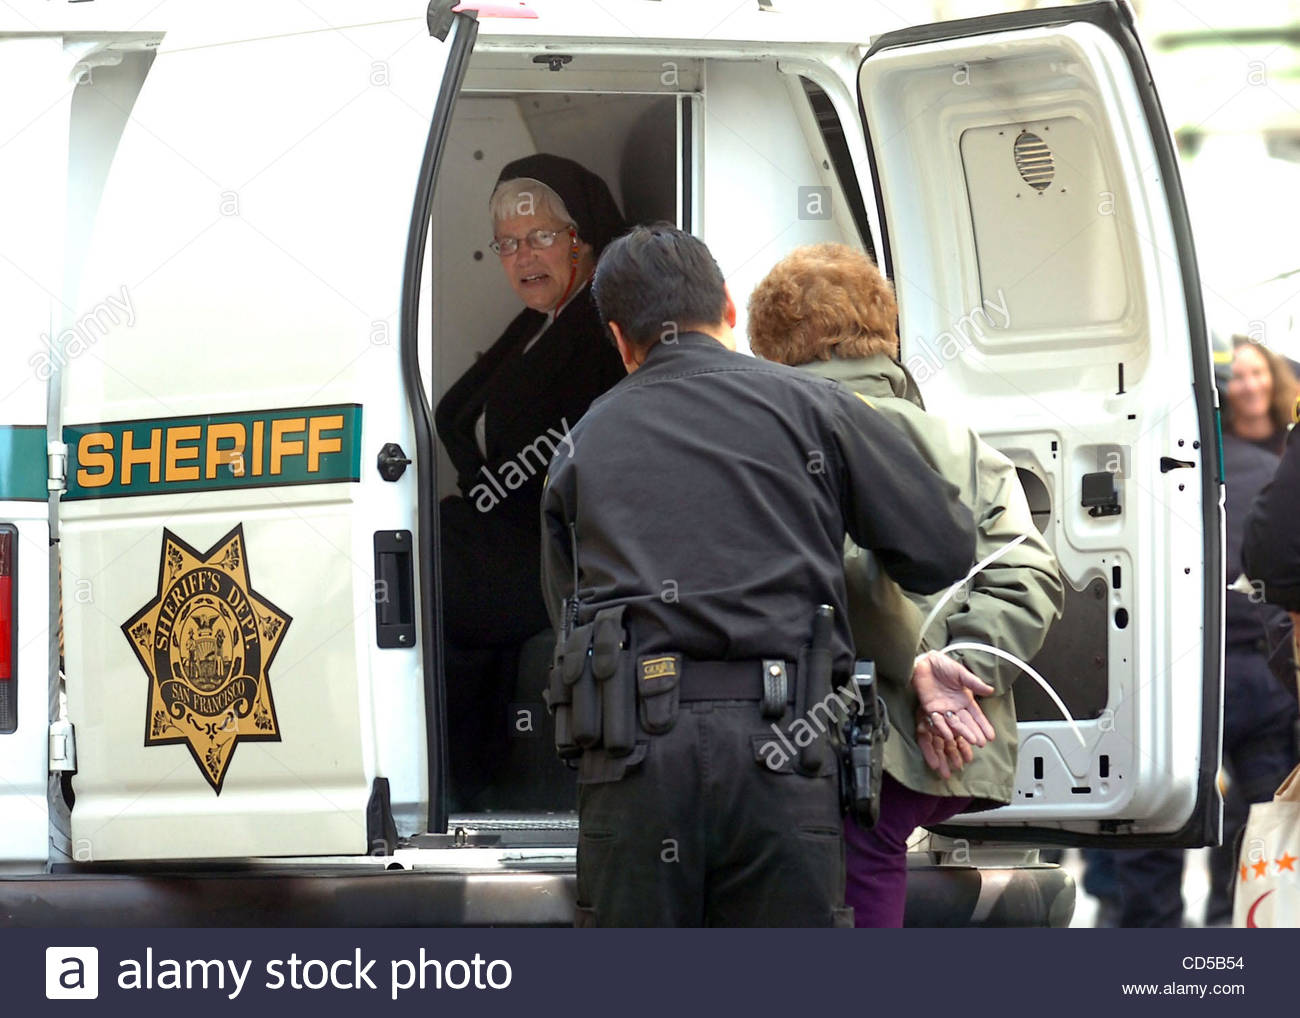 a-woman-in-nuns-clothes-waits-in-a-paddy-wagon-after-being-arrested-CD5B54.jpg